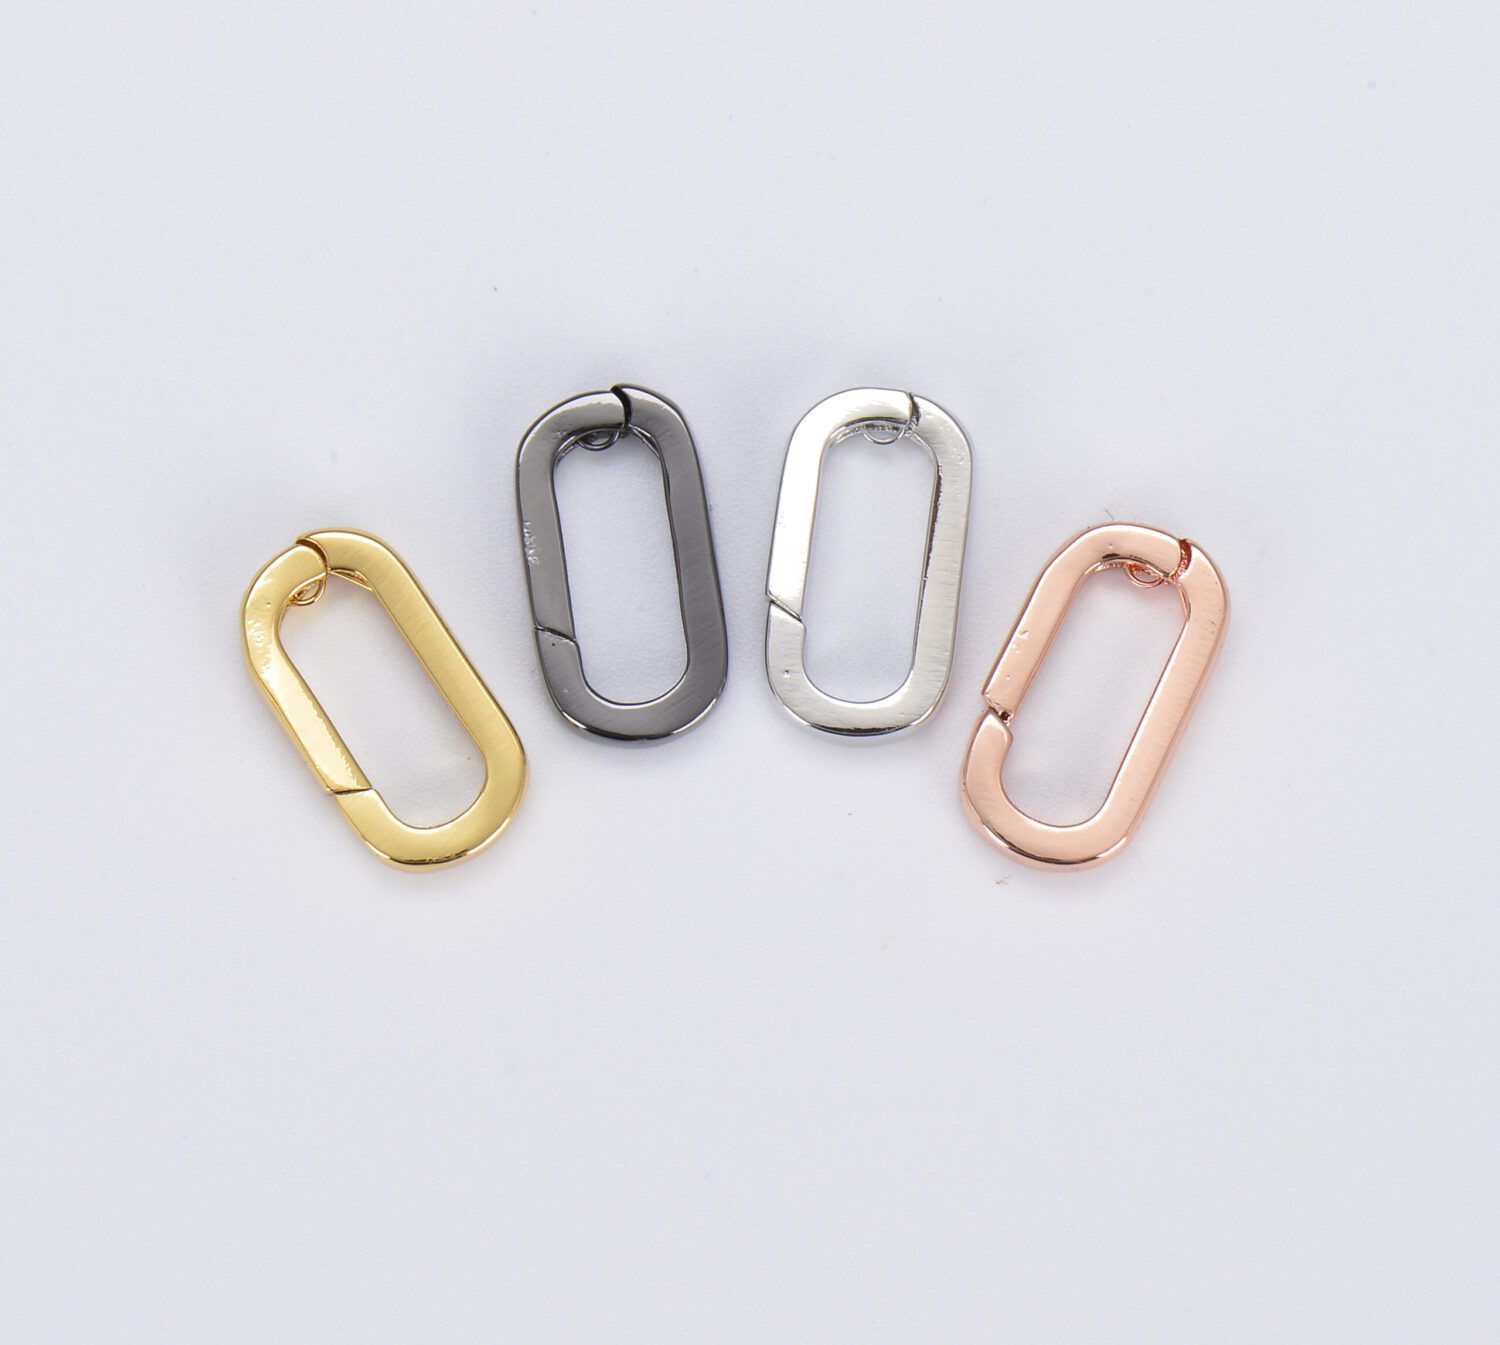 1 Pc 25x10mm Wholesale Carabiner, Paperclip Oval Shape, Circle Screw Clasp,  24K Gold-plated, Rose Gold, or Silver-plated Color Options 